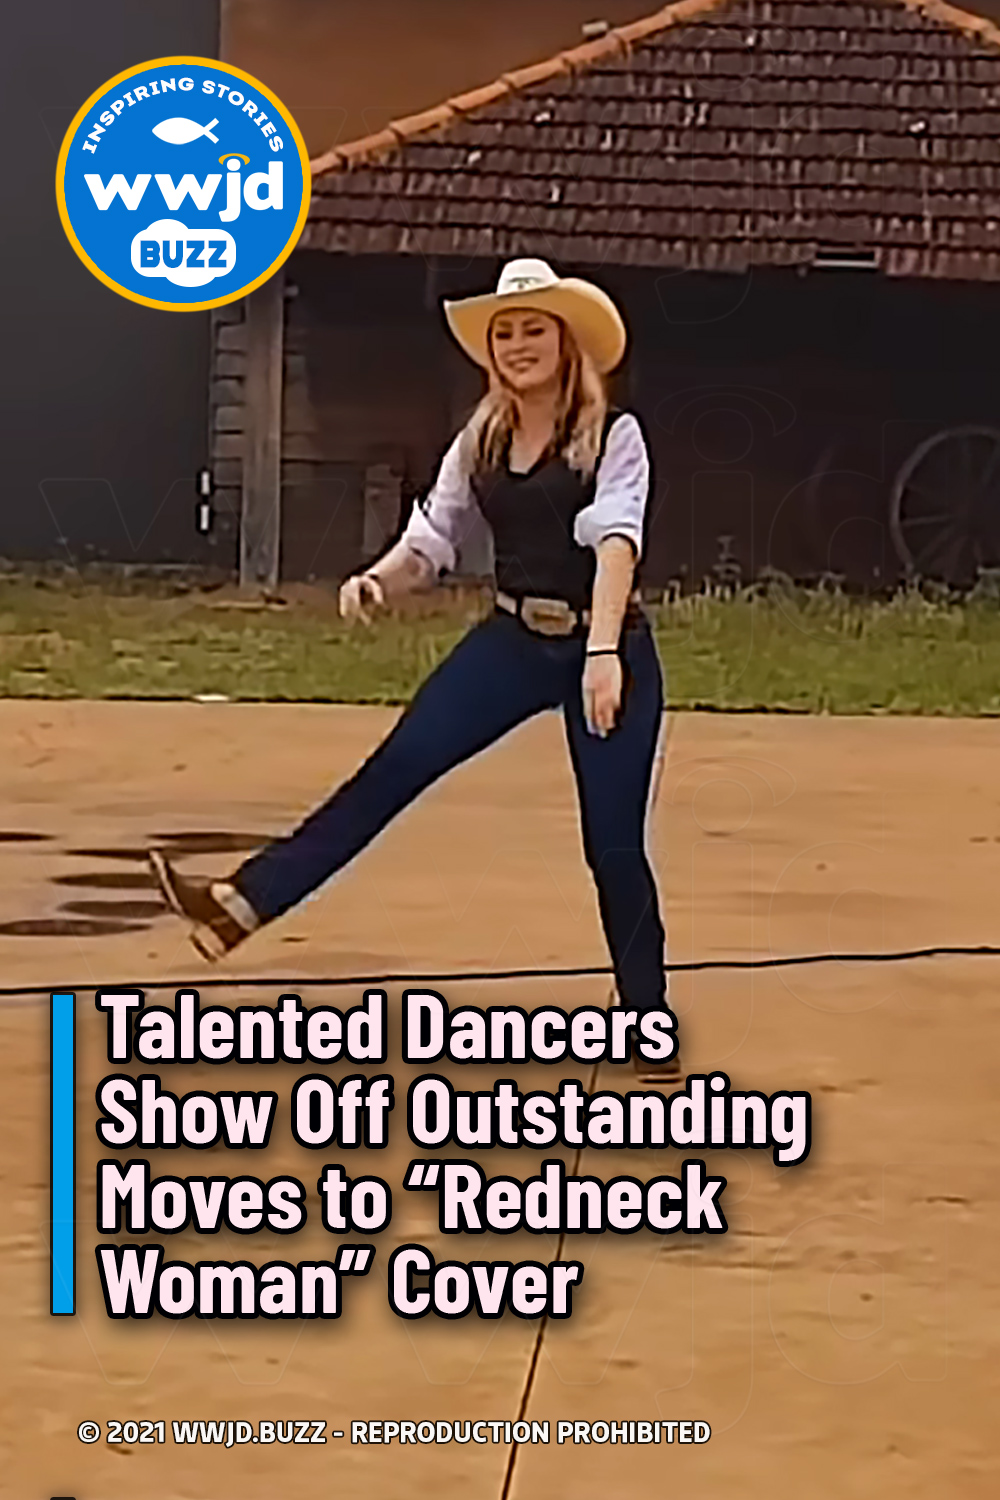 Talented Dancers Show Off Outstanding Moves to “Redneck Woman” Cover